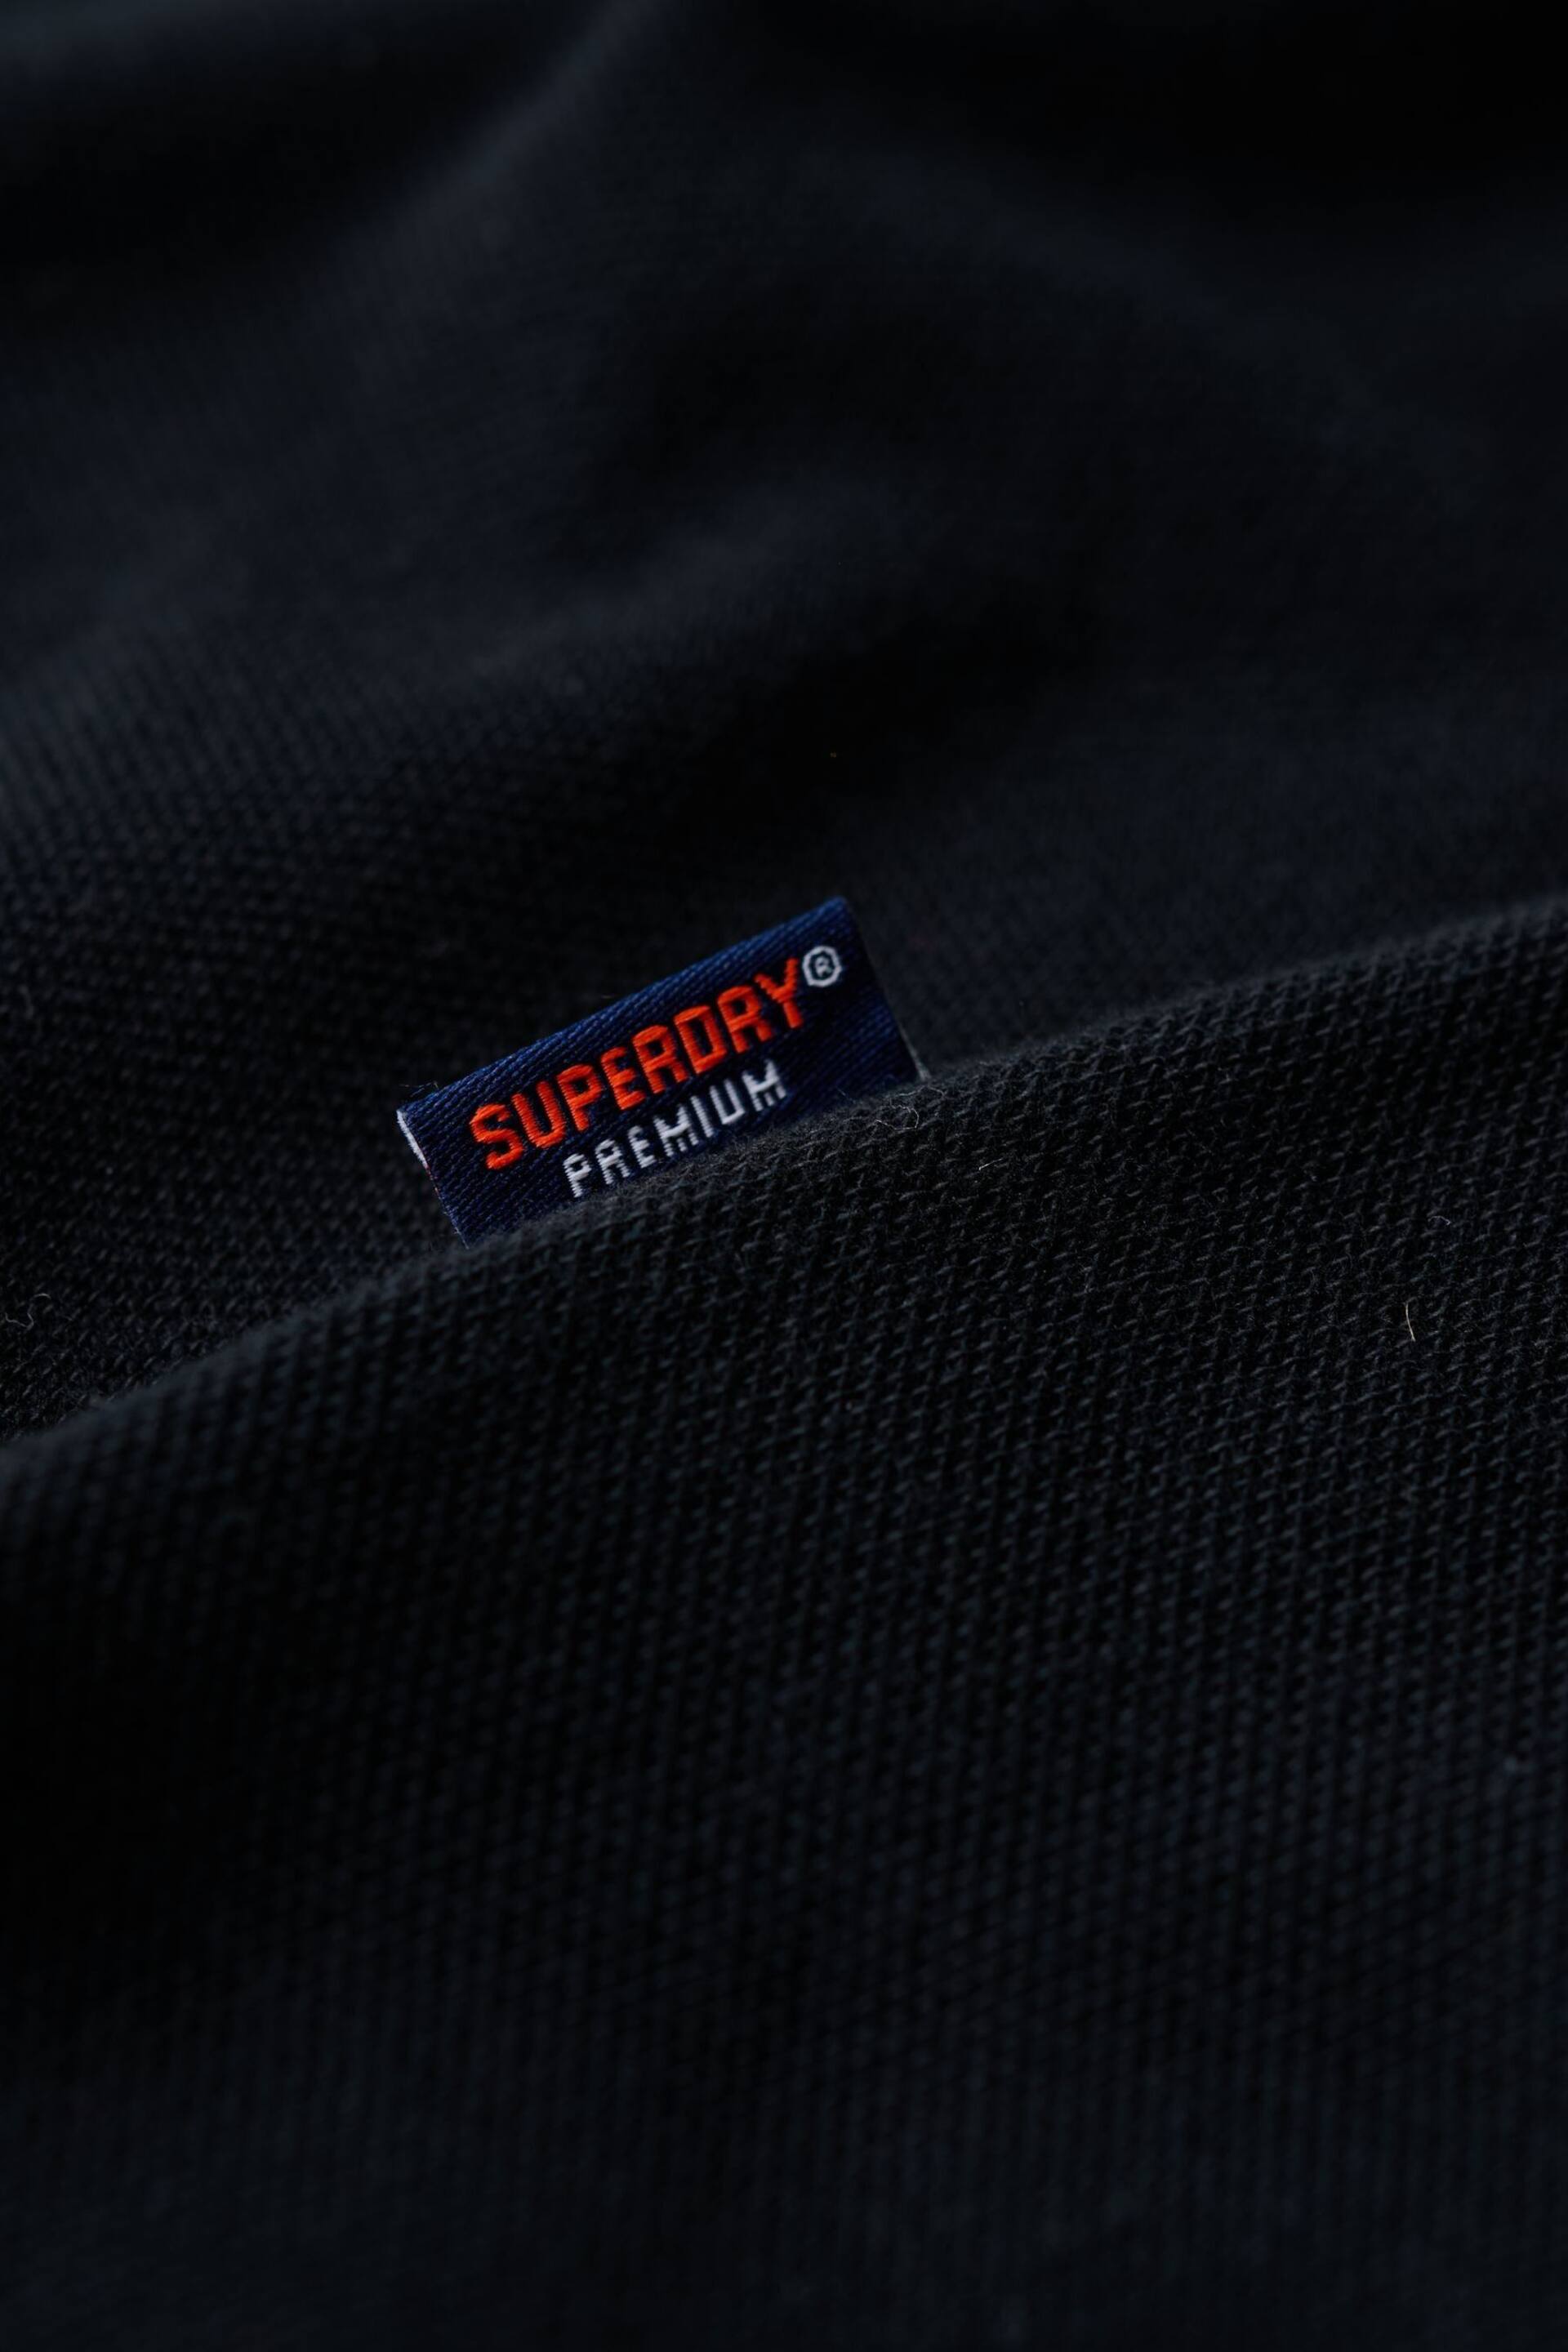 Superdry Black Classic Pique Polo Shirt - Image 8 of 9